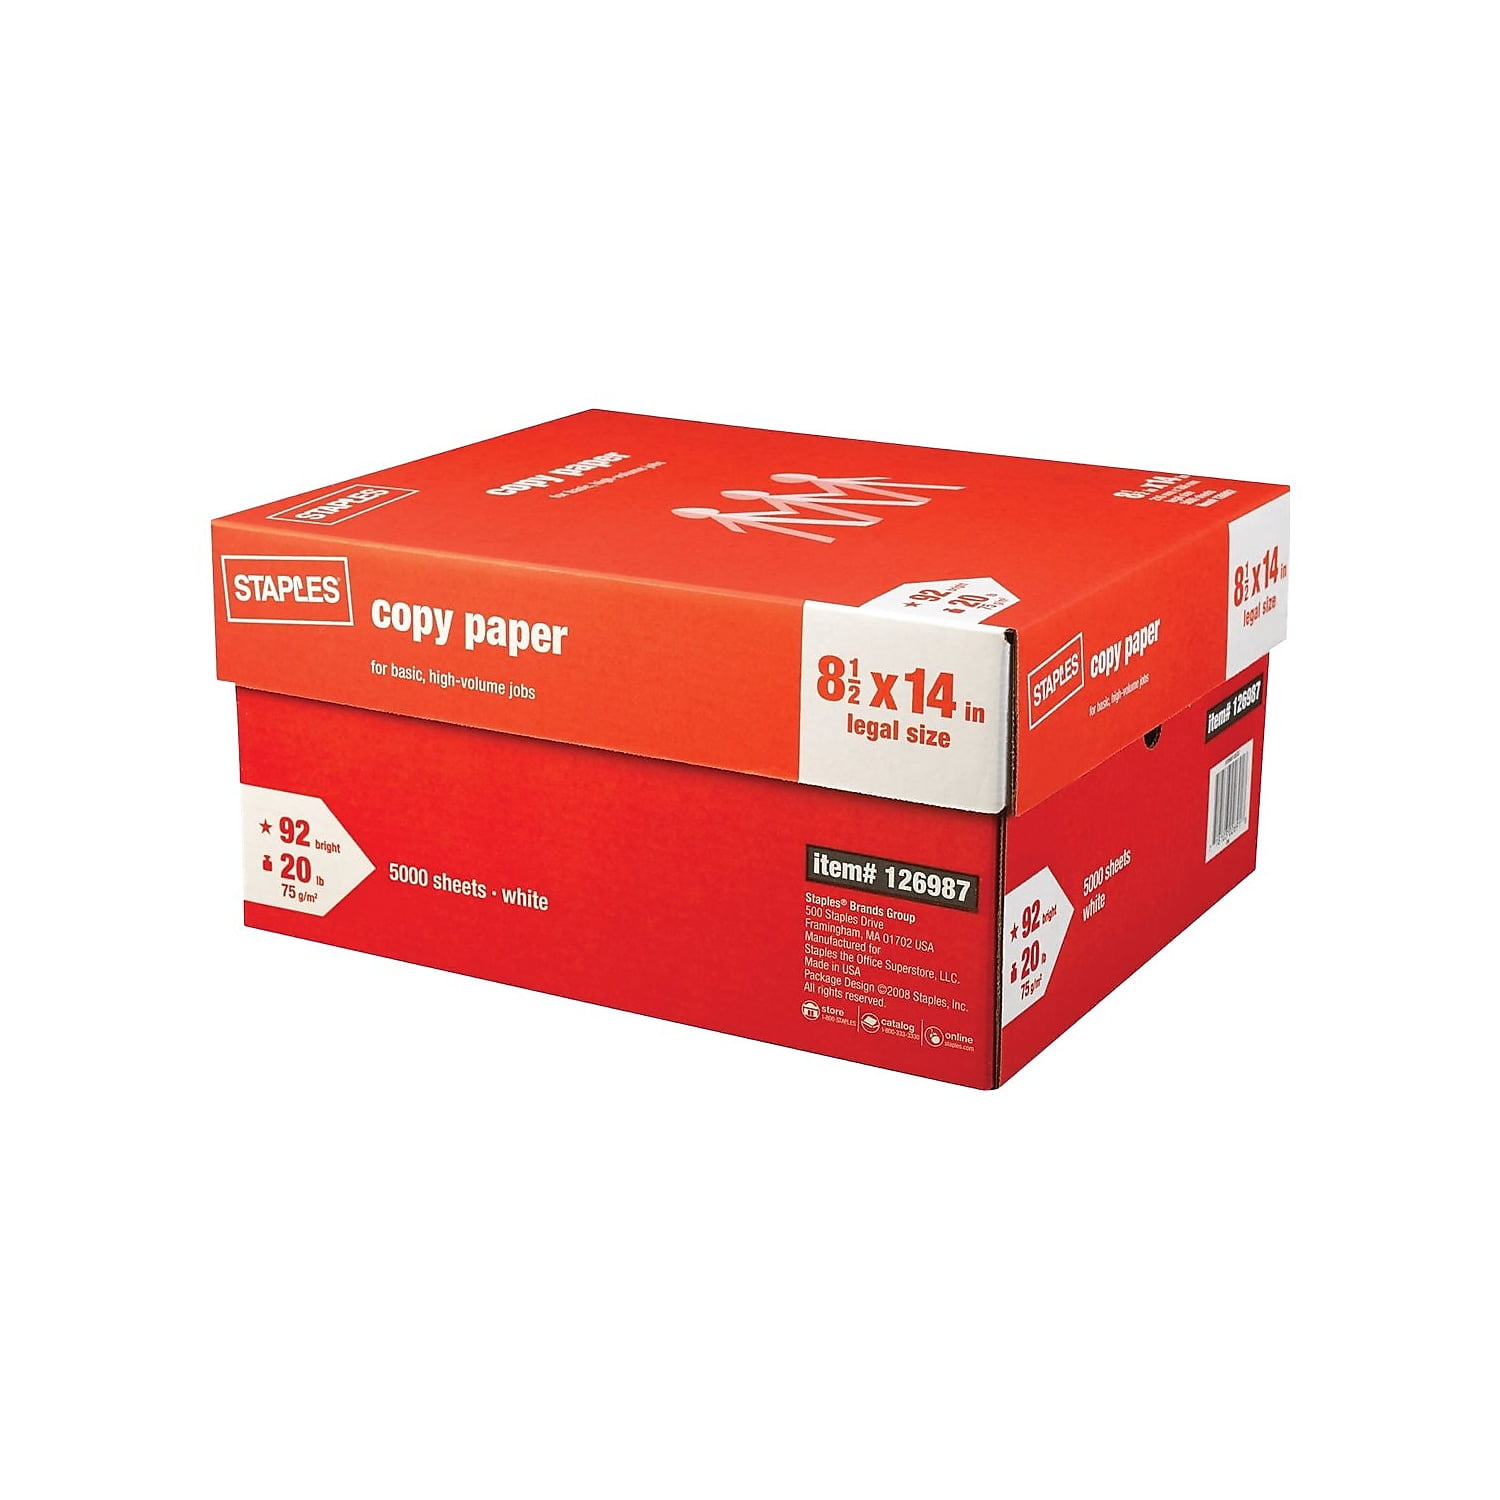  Staples Multipurpose Copy/Fax/Laser/Inkjet Printer Paper, 96  Brightness, 20 lb, Letter Size (8.5 x 11), 5 Reams Pack, 2500 Total Sheets  (513099-5 Ream Multipack) : Office Products